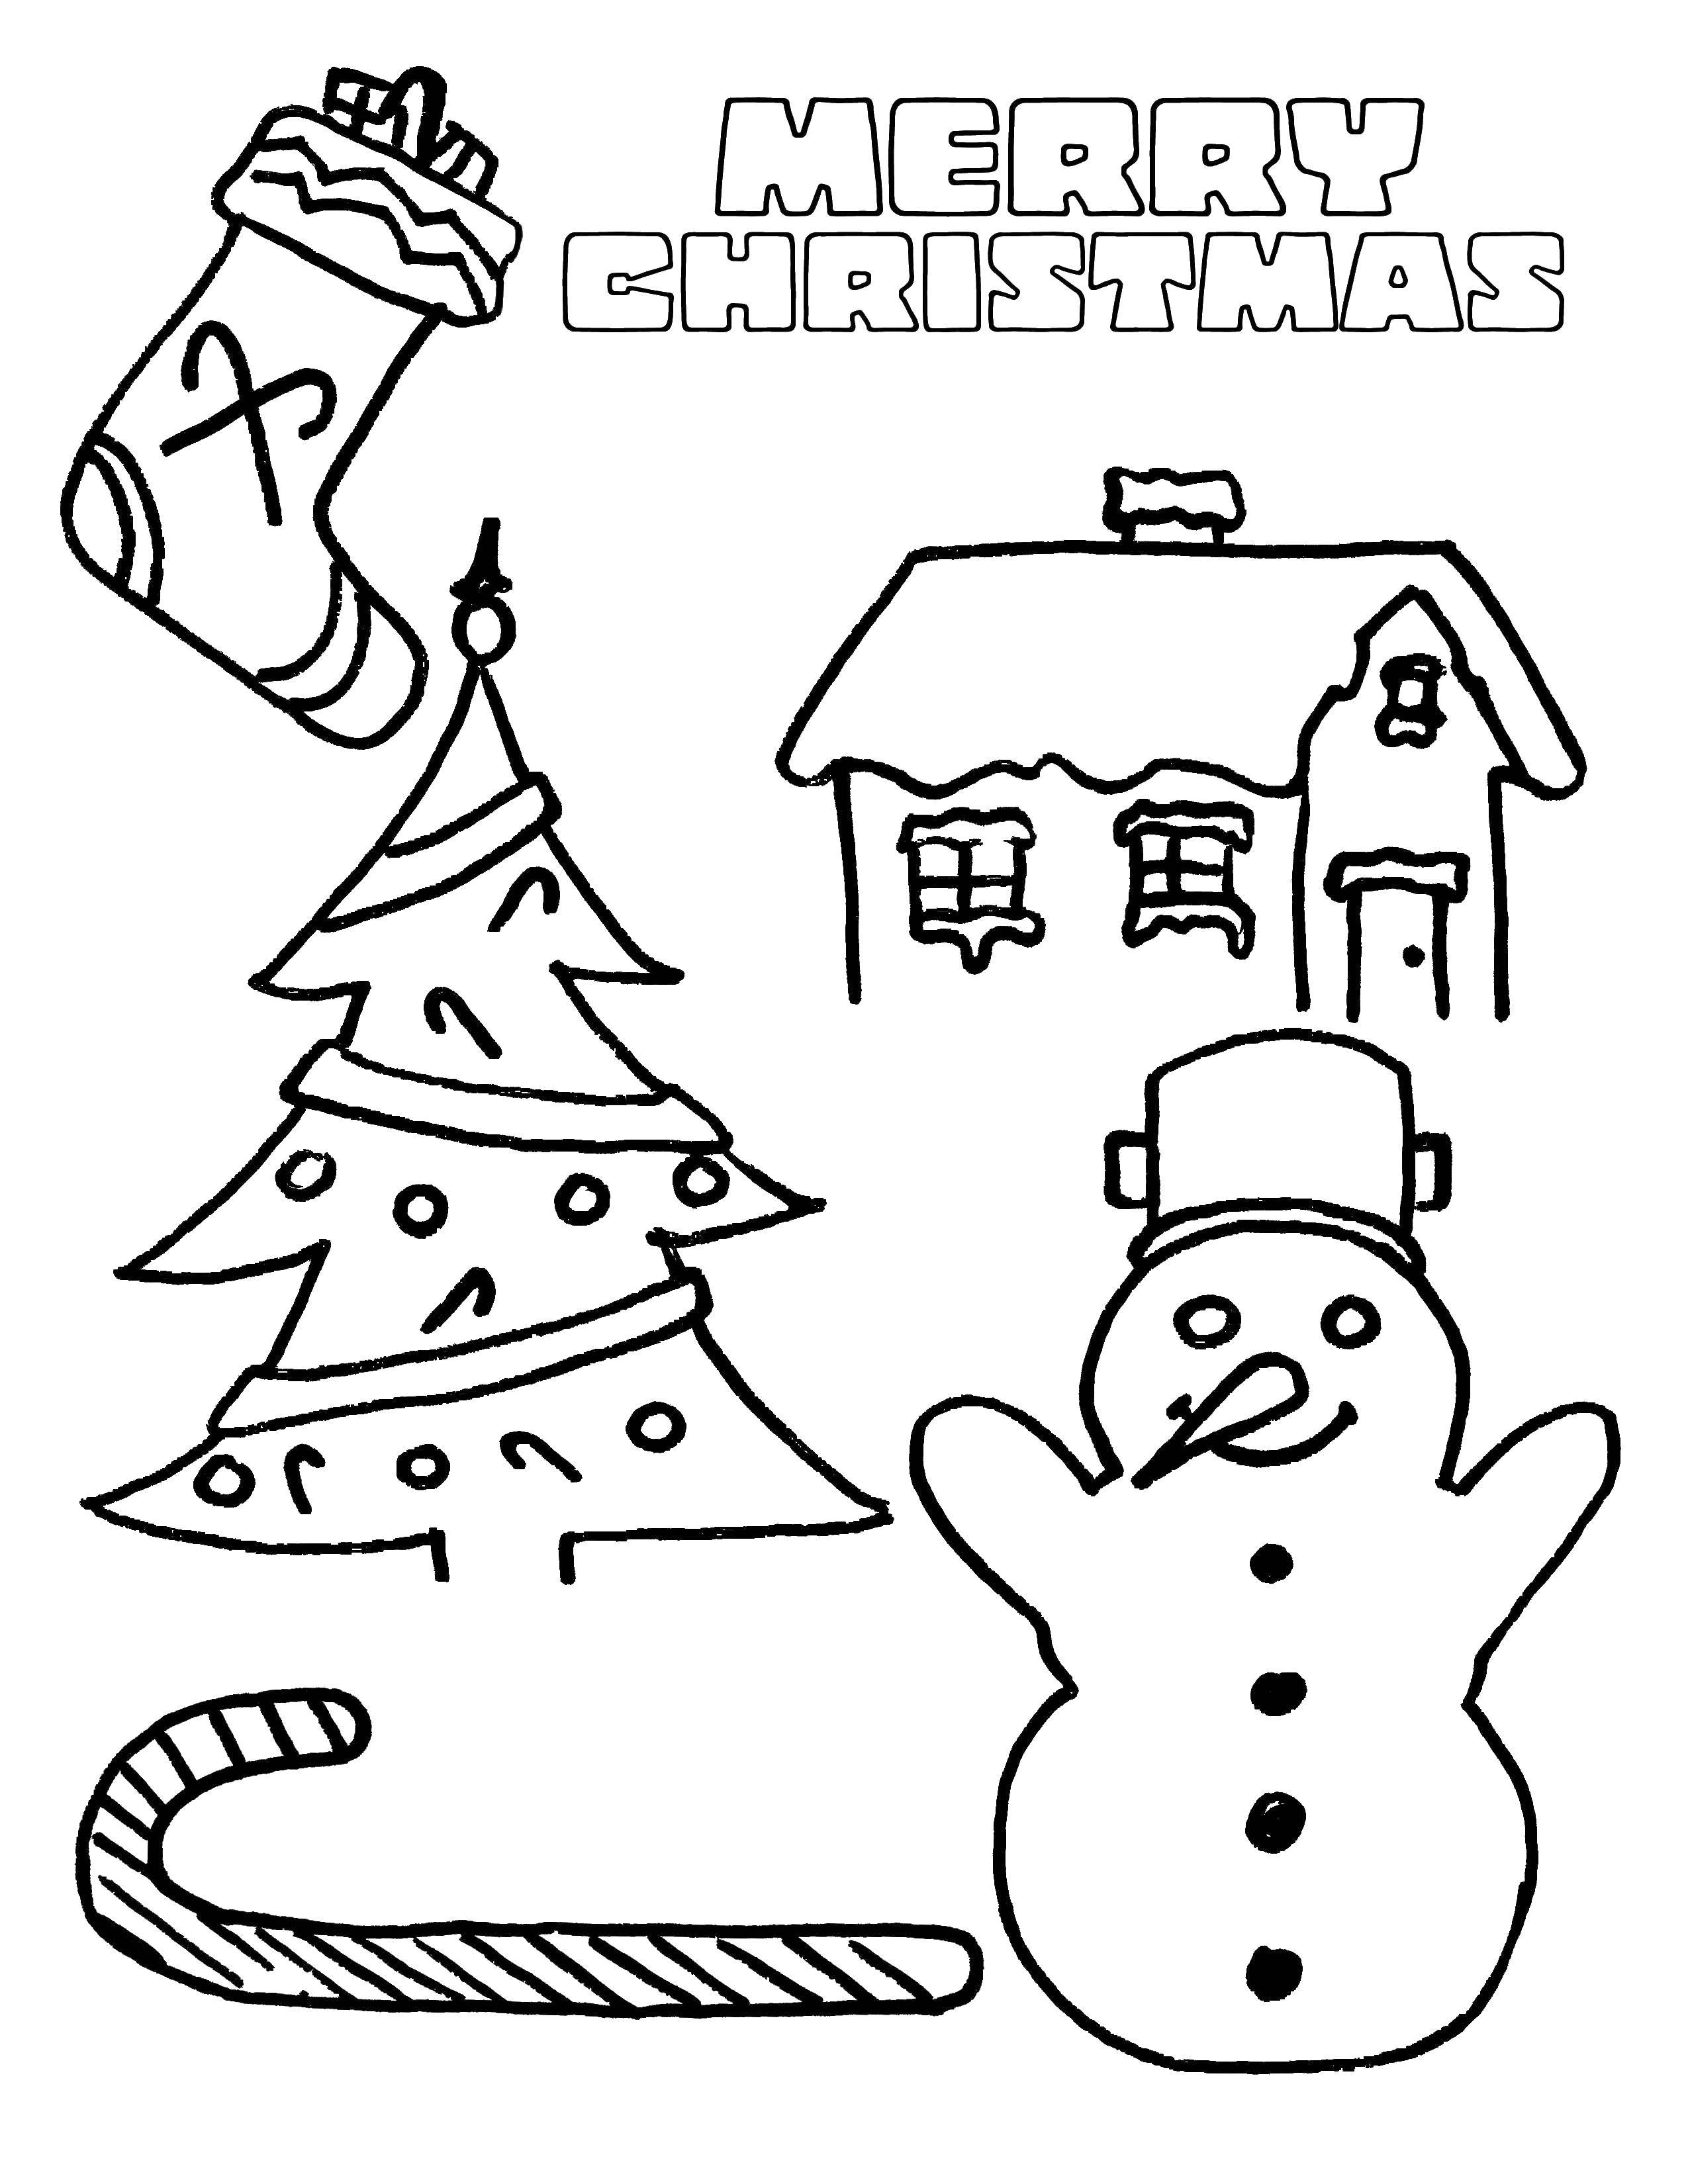 Coloring Merry Christmas!. Category Christmas. Tags:  Christmas, gifts.